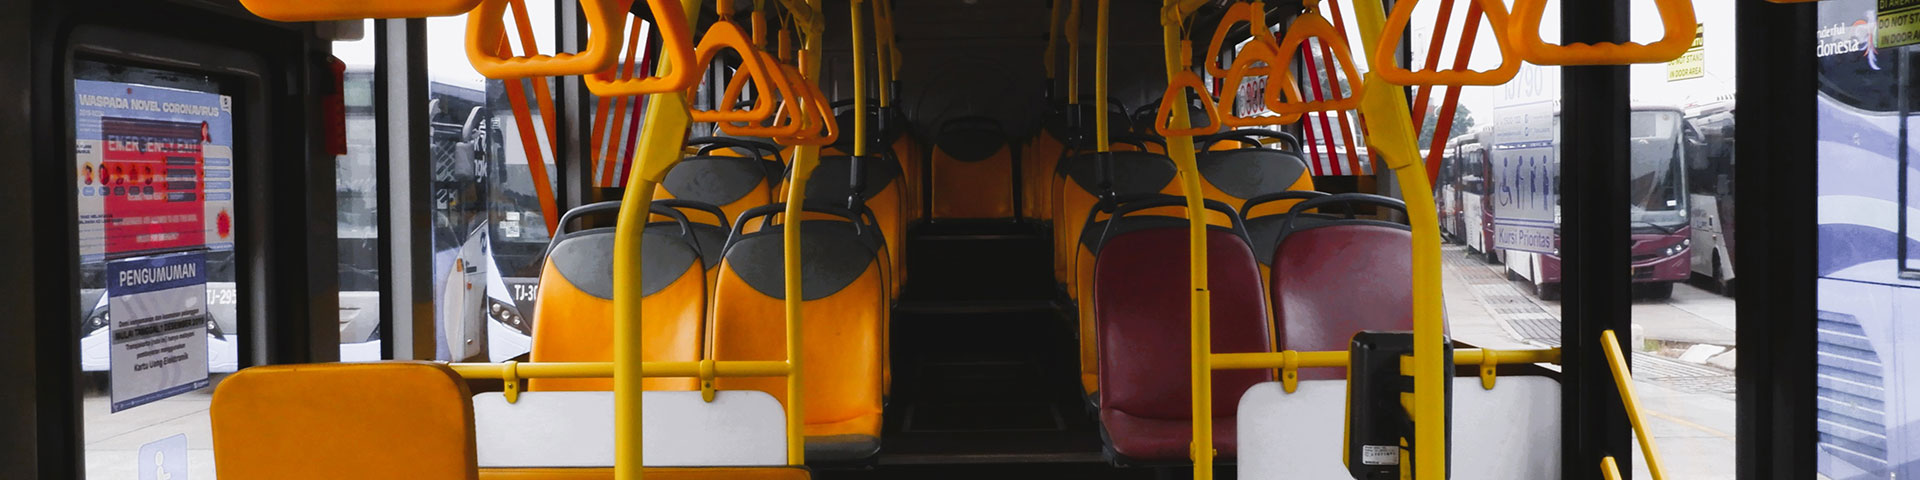 A yellow and black seats on a bus.